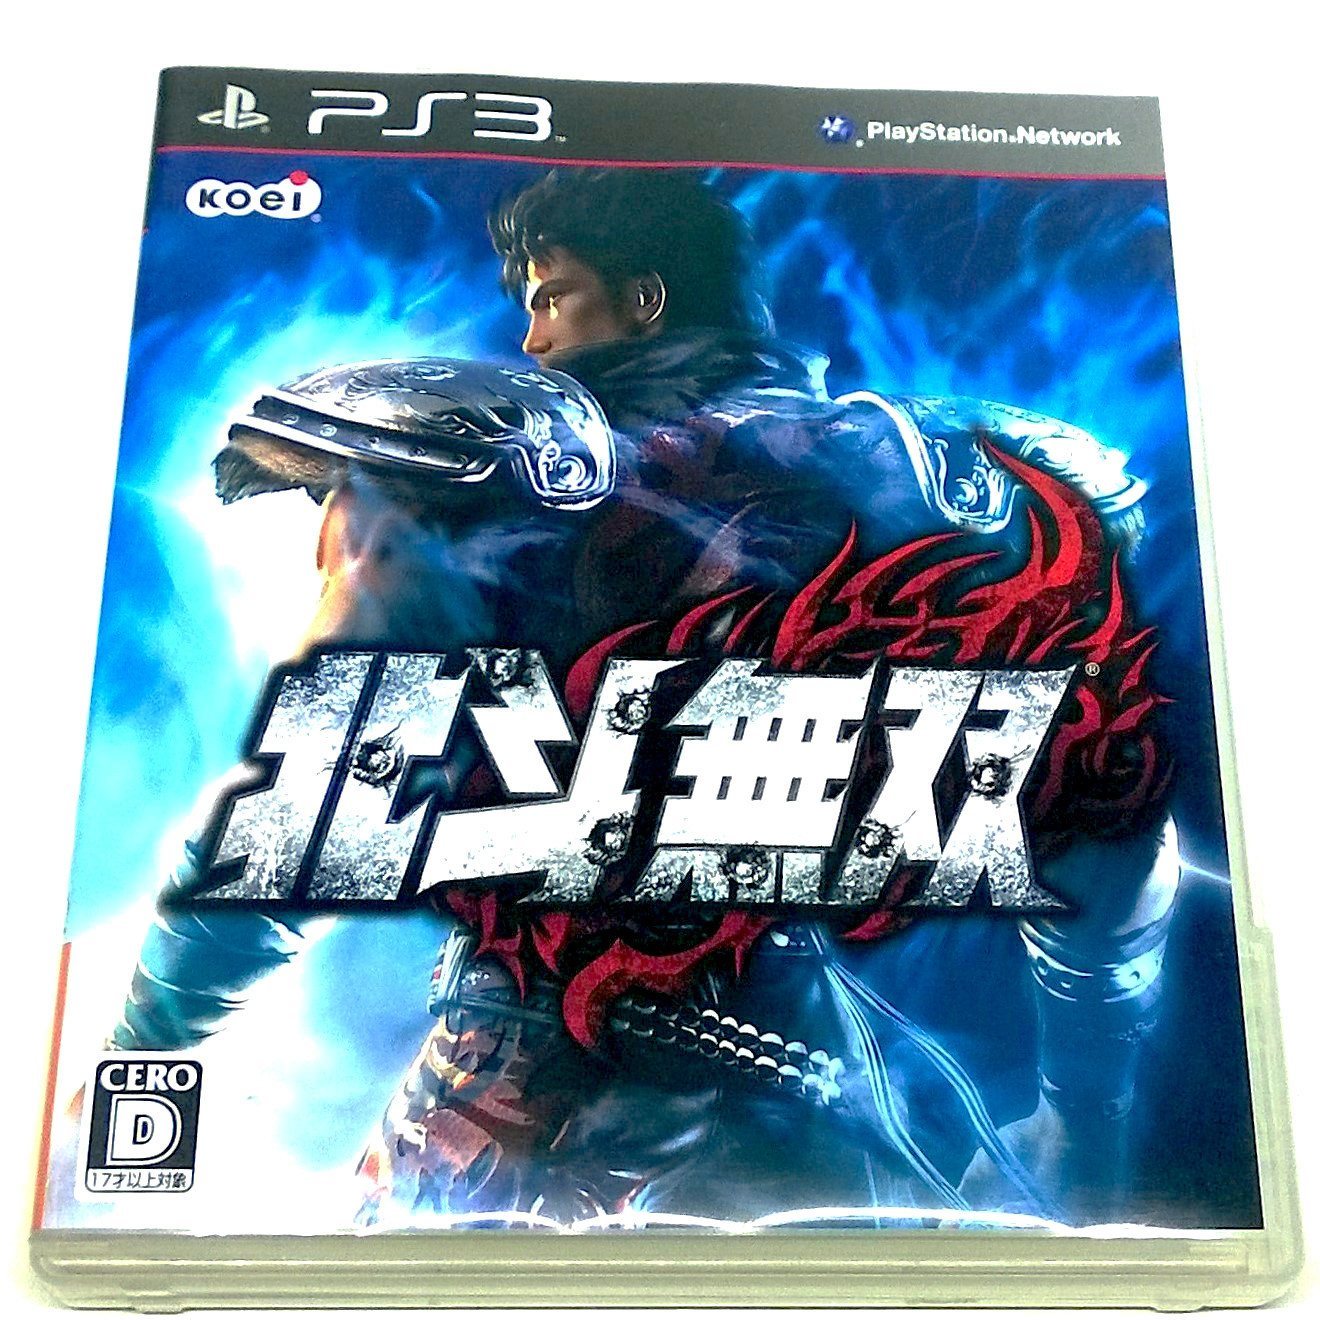 Hokuto Musou for PlayStation 3 (import) - Front of case